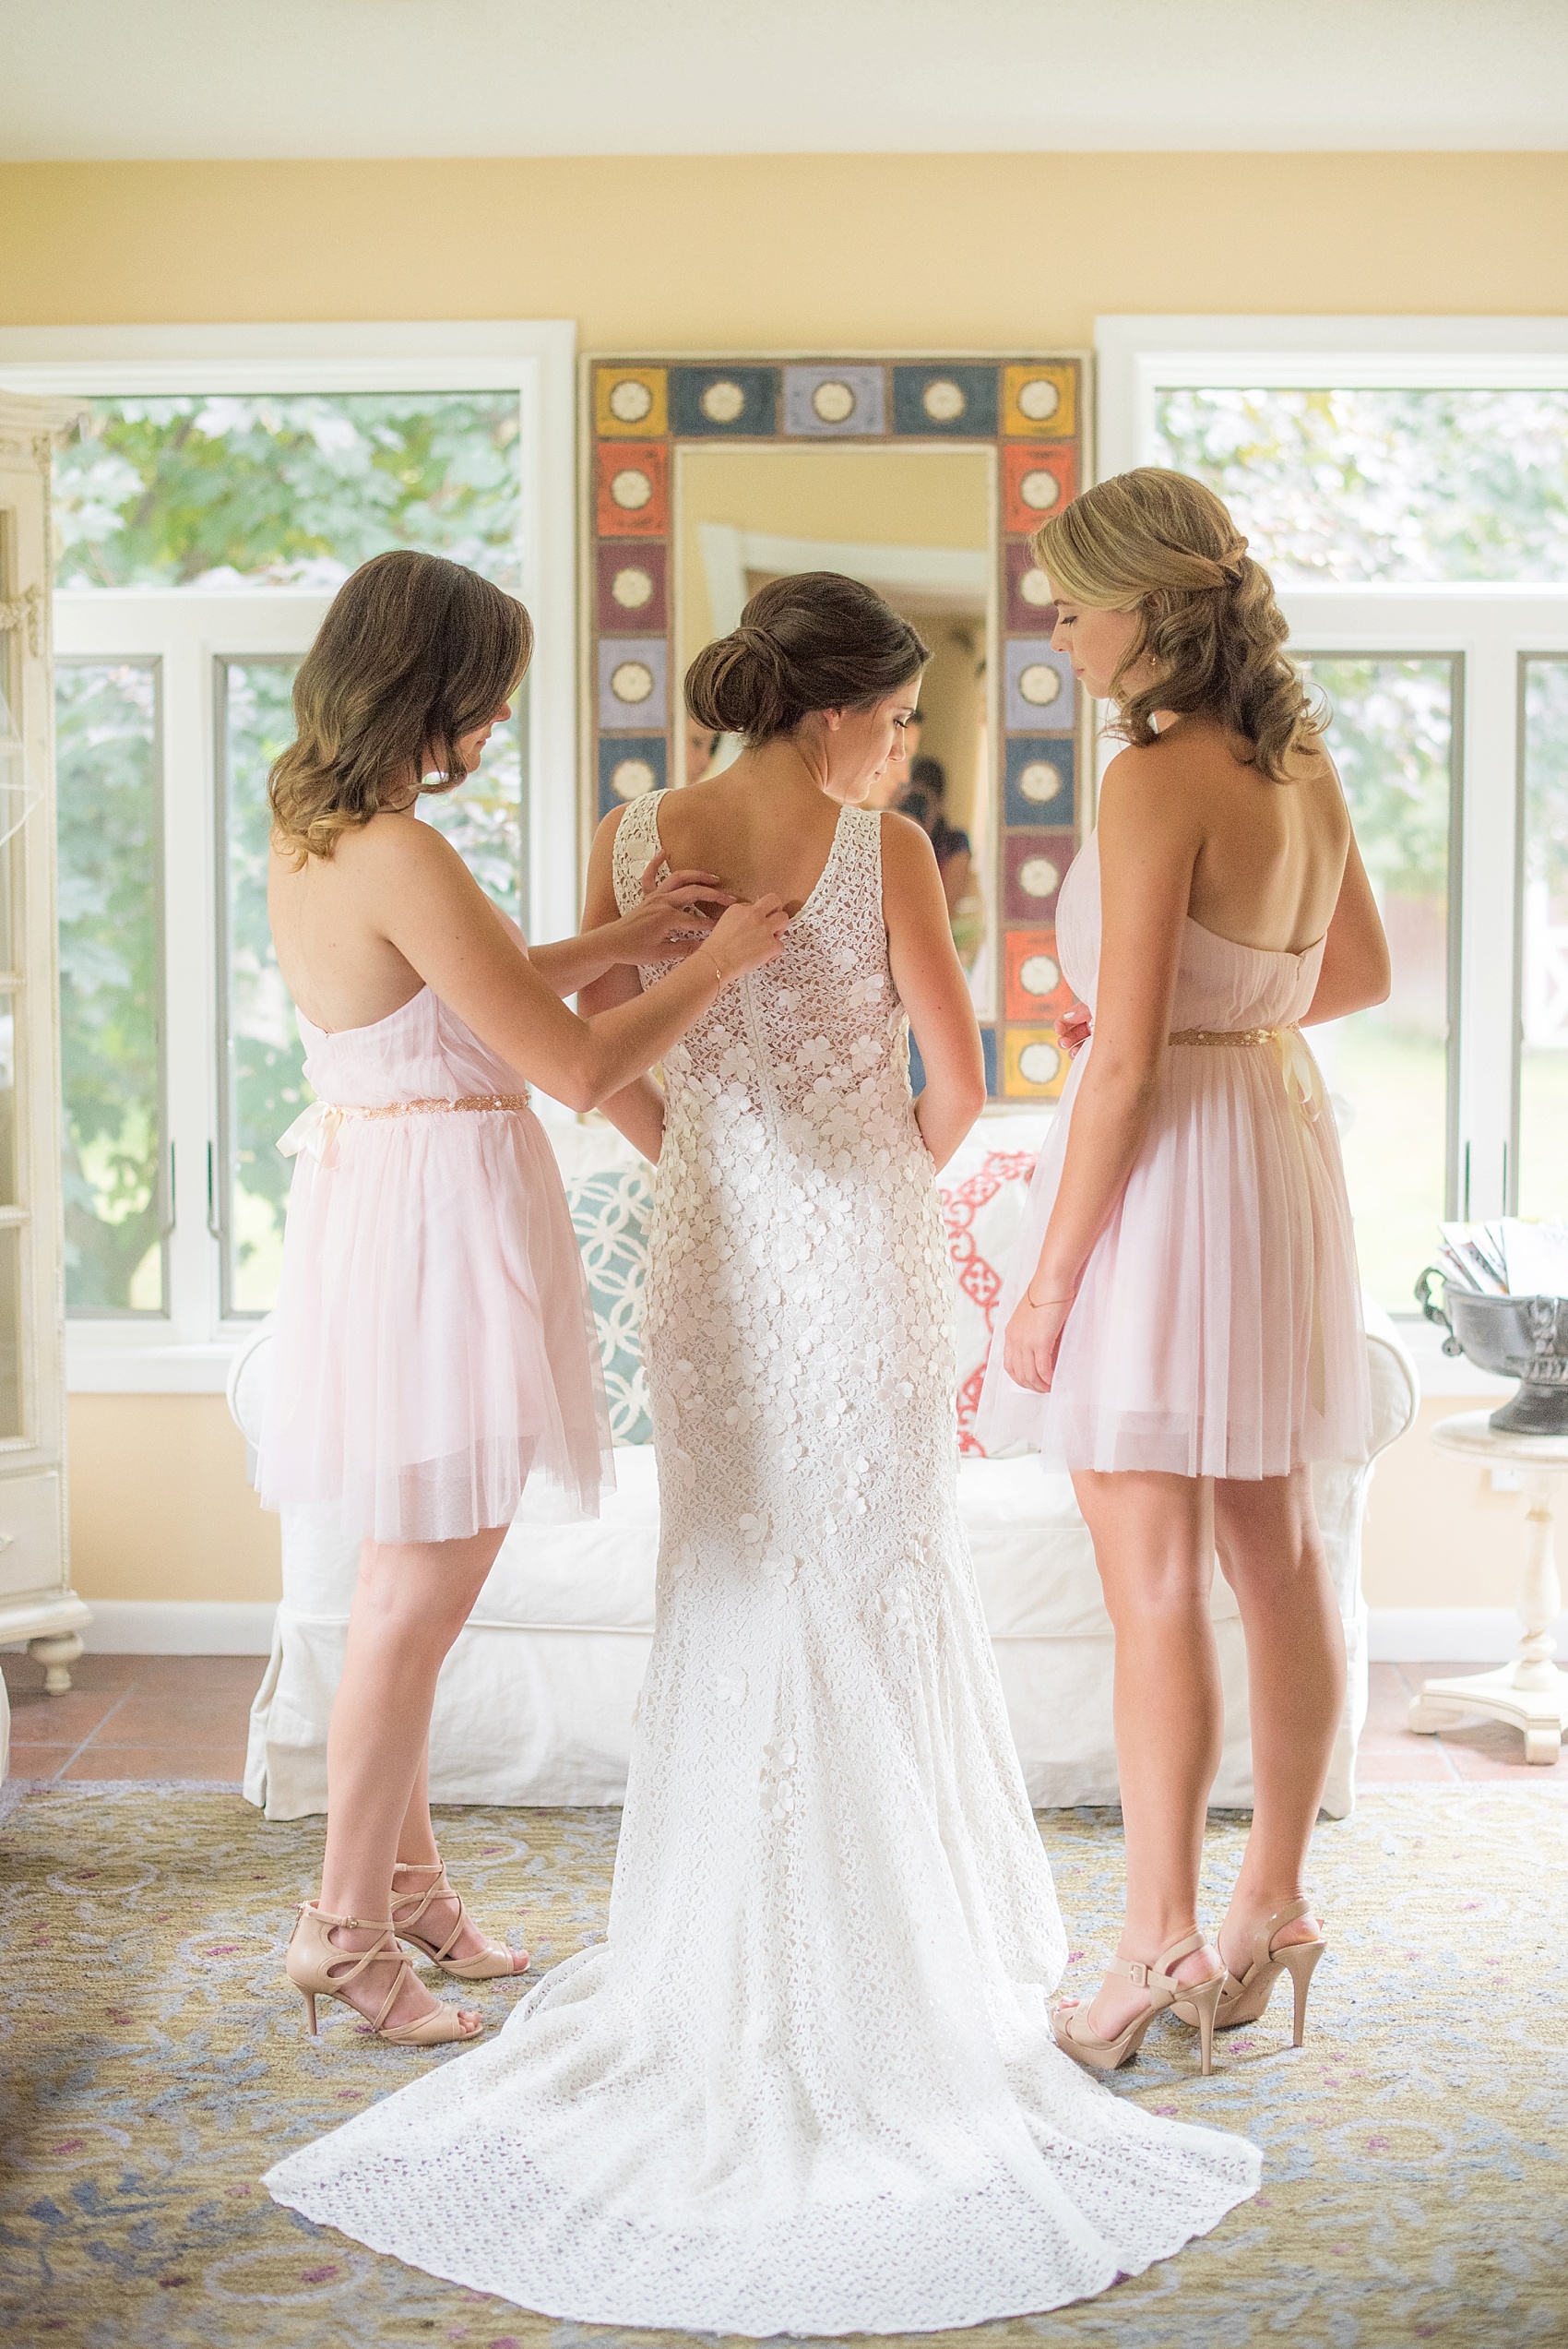 Getting ready wedding photos with pink bridesmaids. By NYC wedding photographer Mikkel Paige Photography.